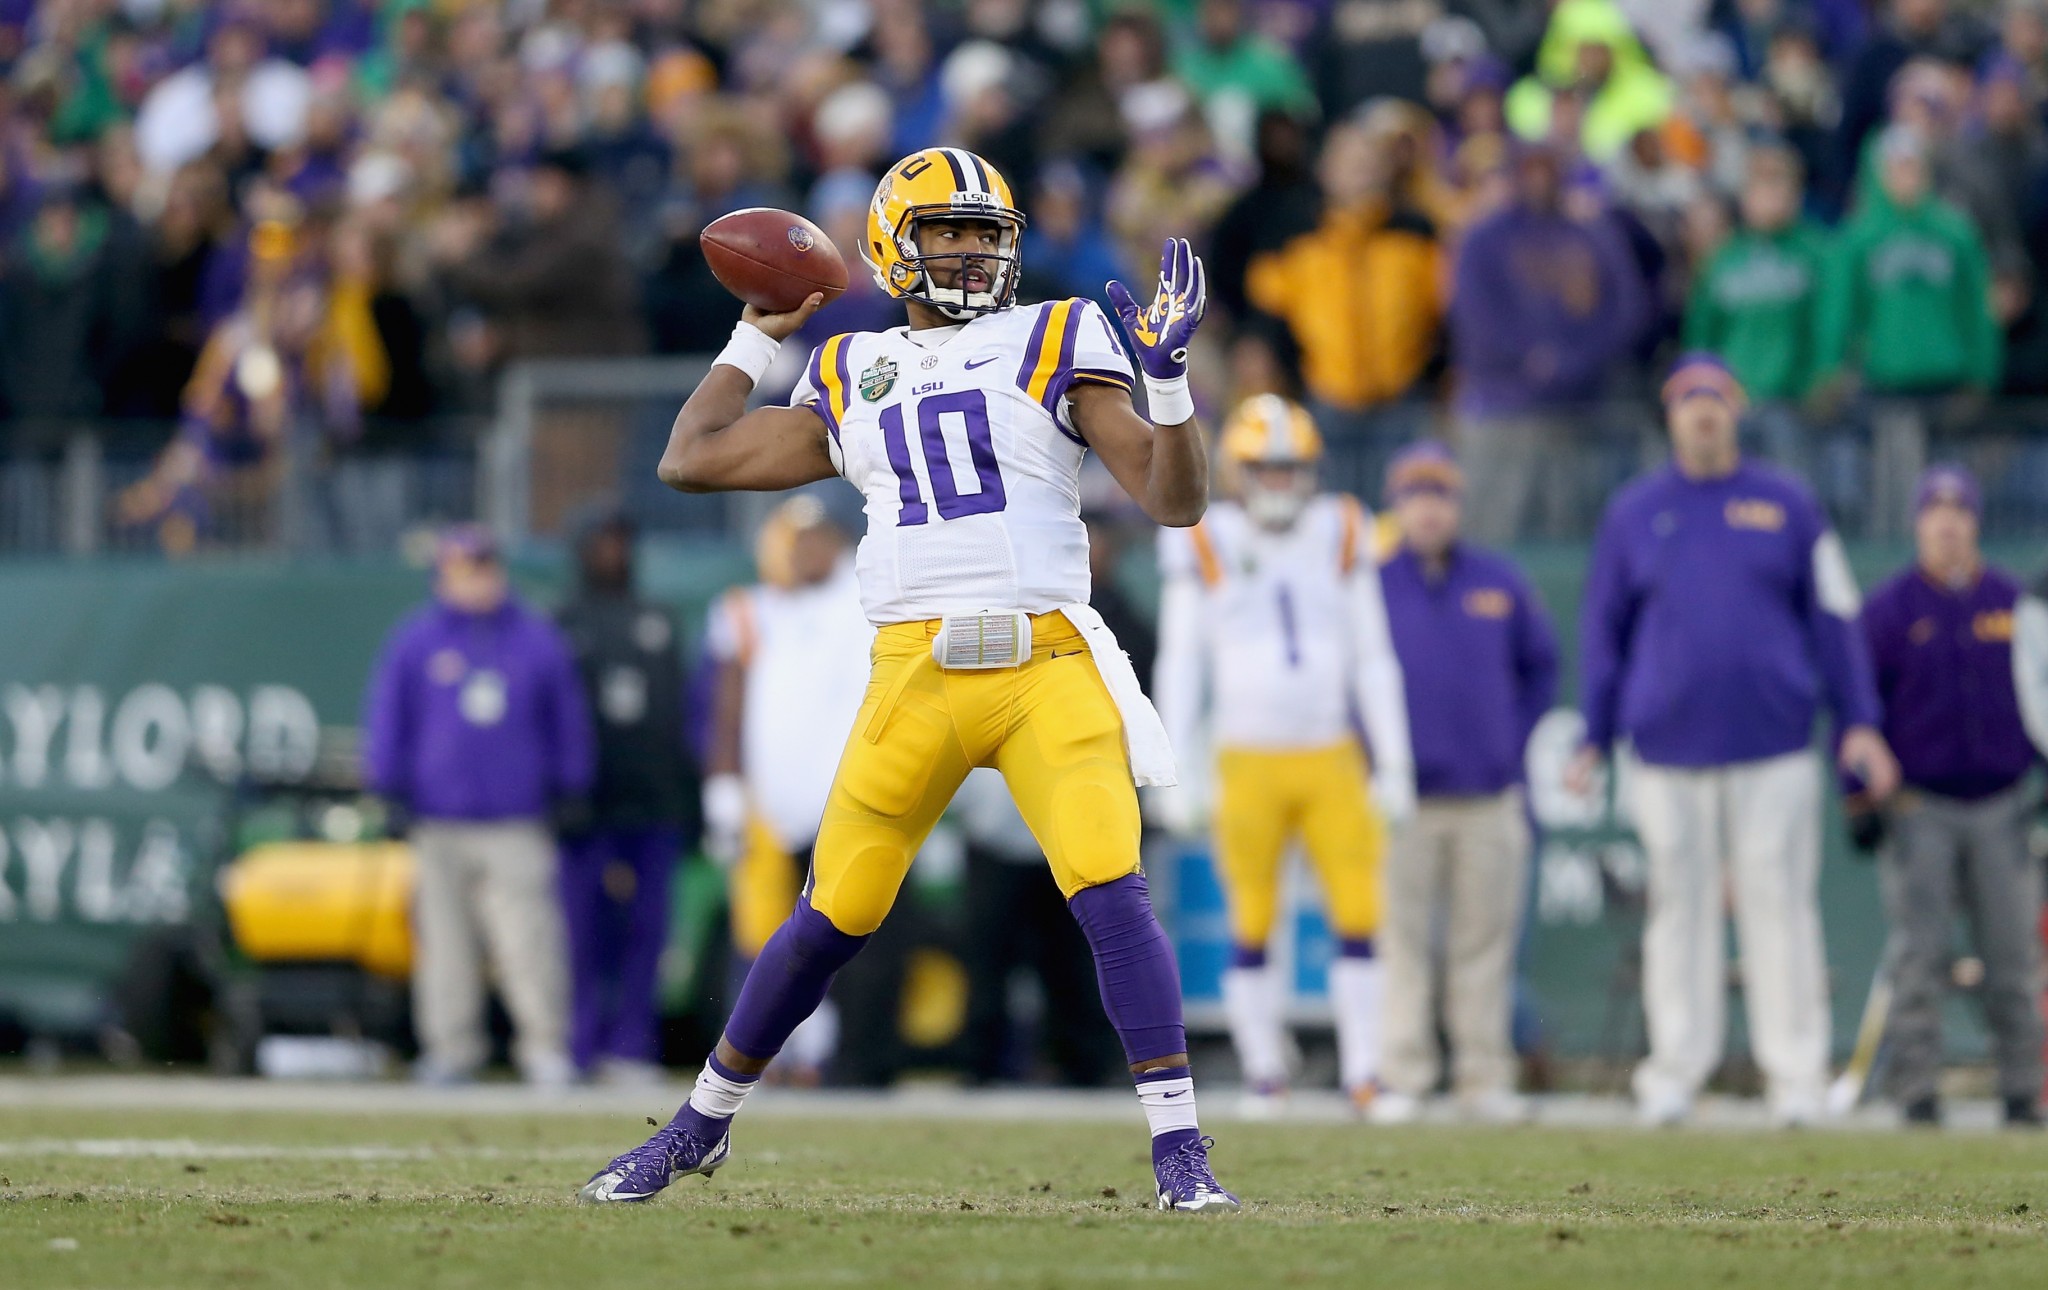 Anthony Jennings transferred from LSU in March (Getty Images).